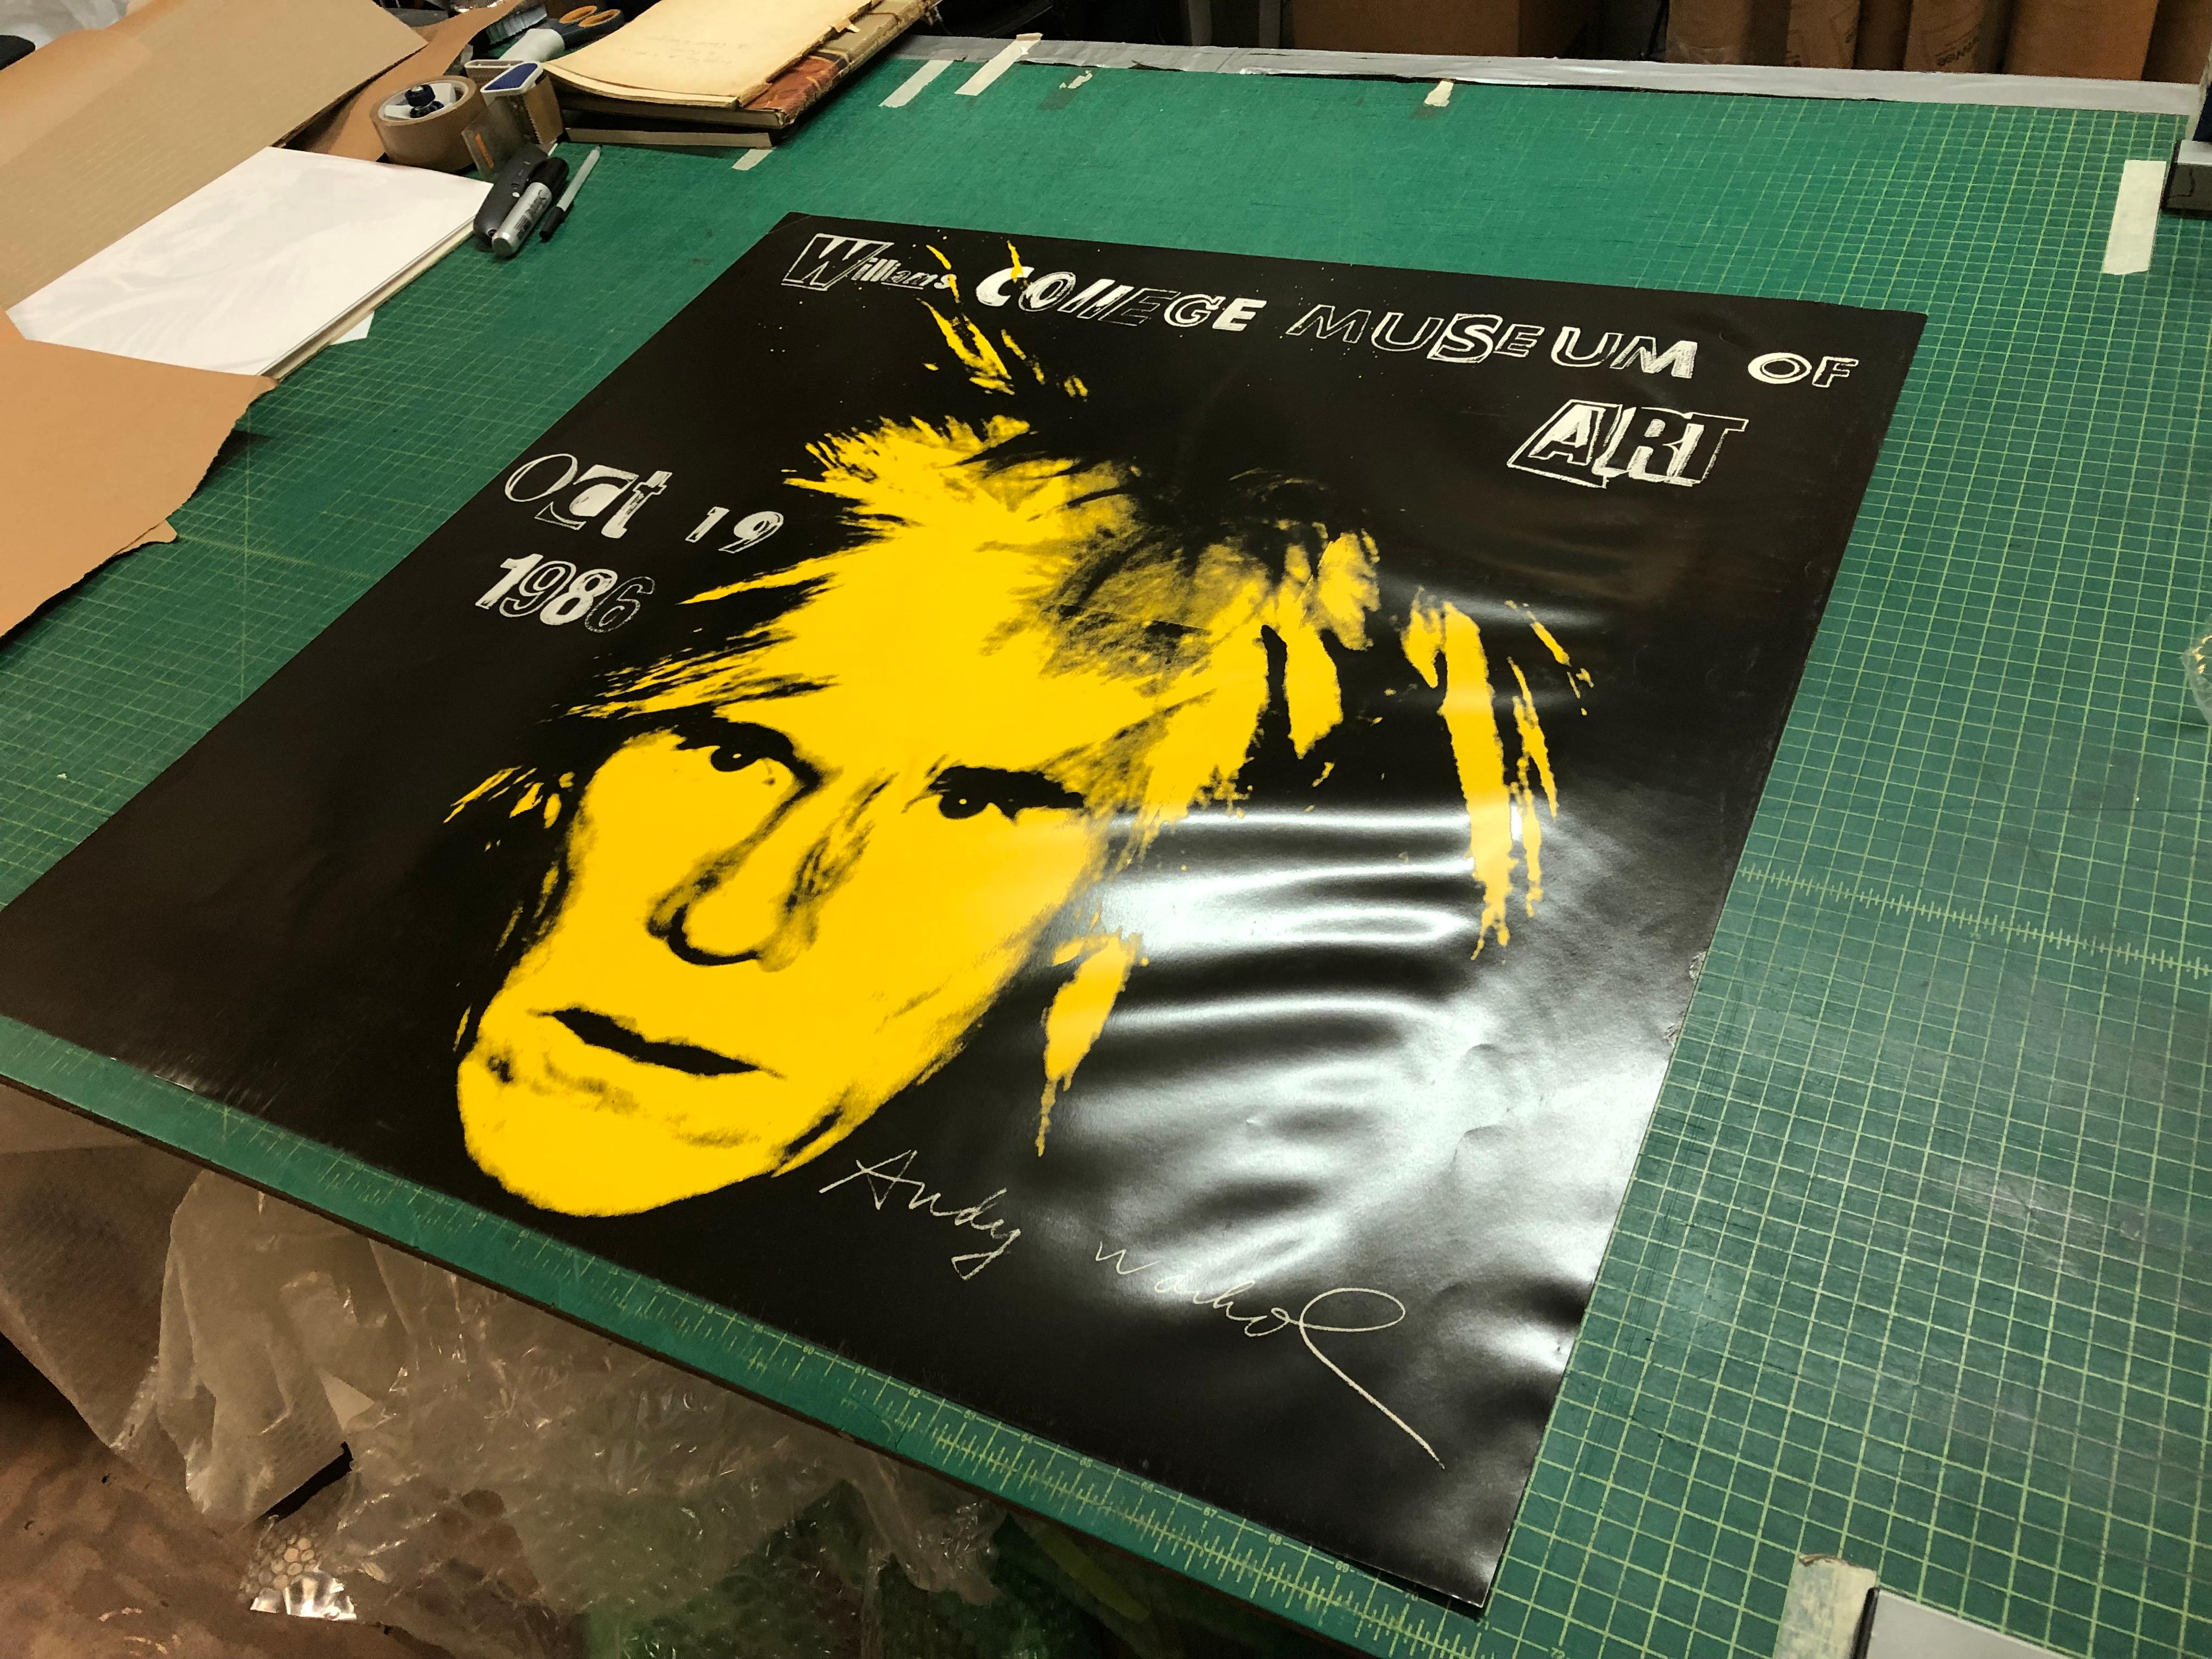 1986 After Andy Warhol 'Self Portrait' Pop Art Black, Yellow Offset Lithograph 2